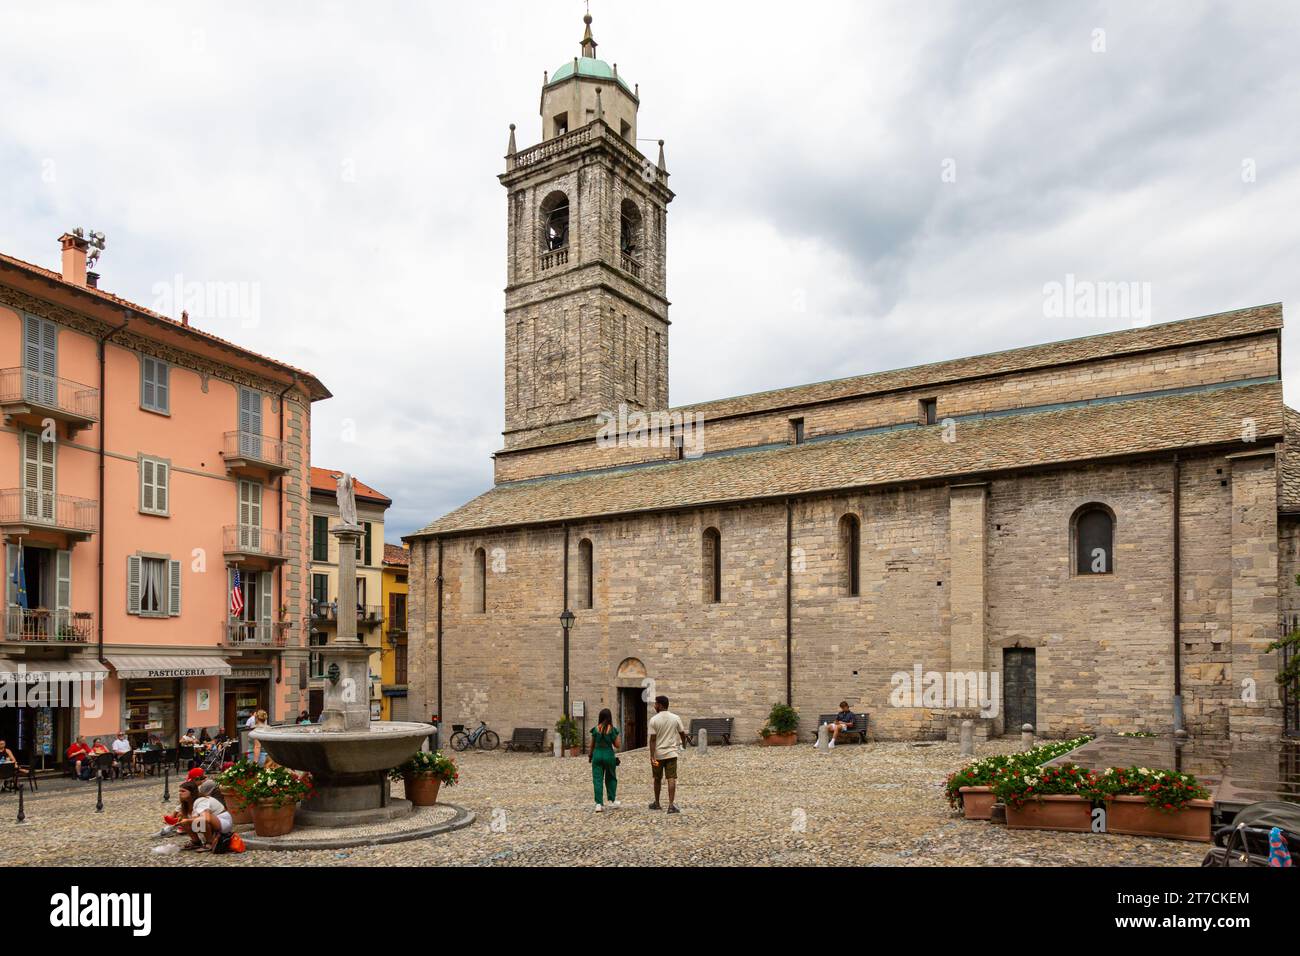 The 12th century Basilica of Saint James stands beyond a fountain in the church square in Bellagio, Lombardy, Italy. Stock Photo